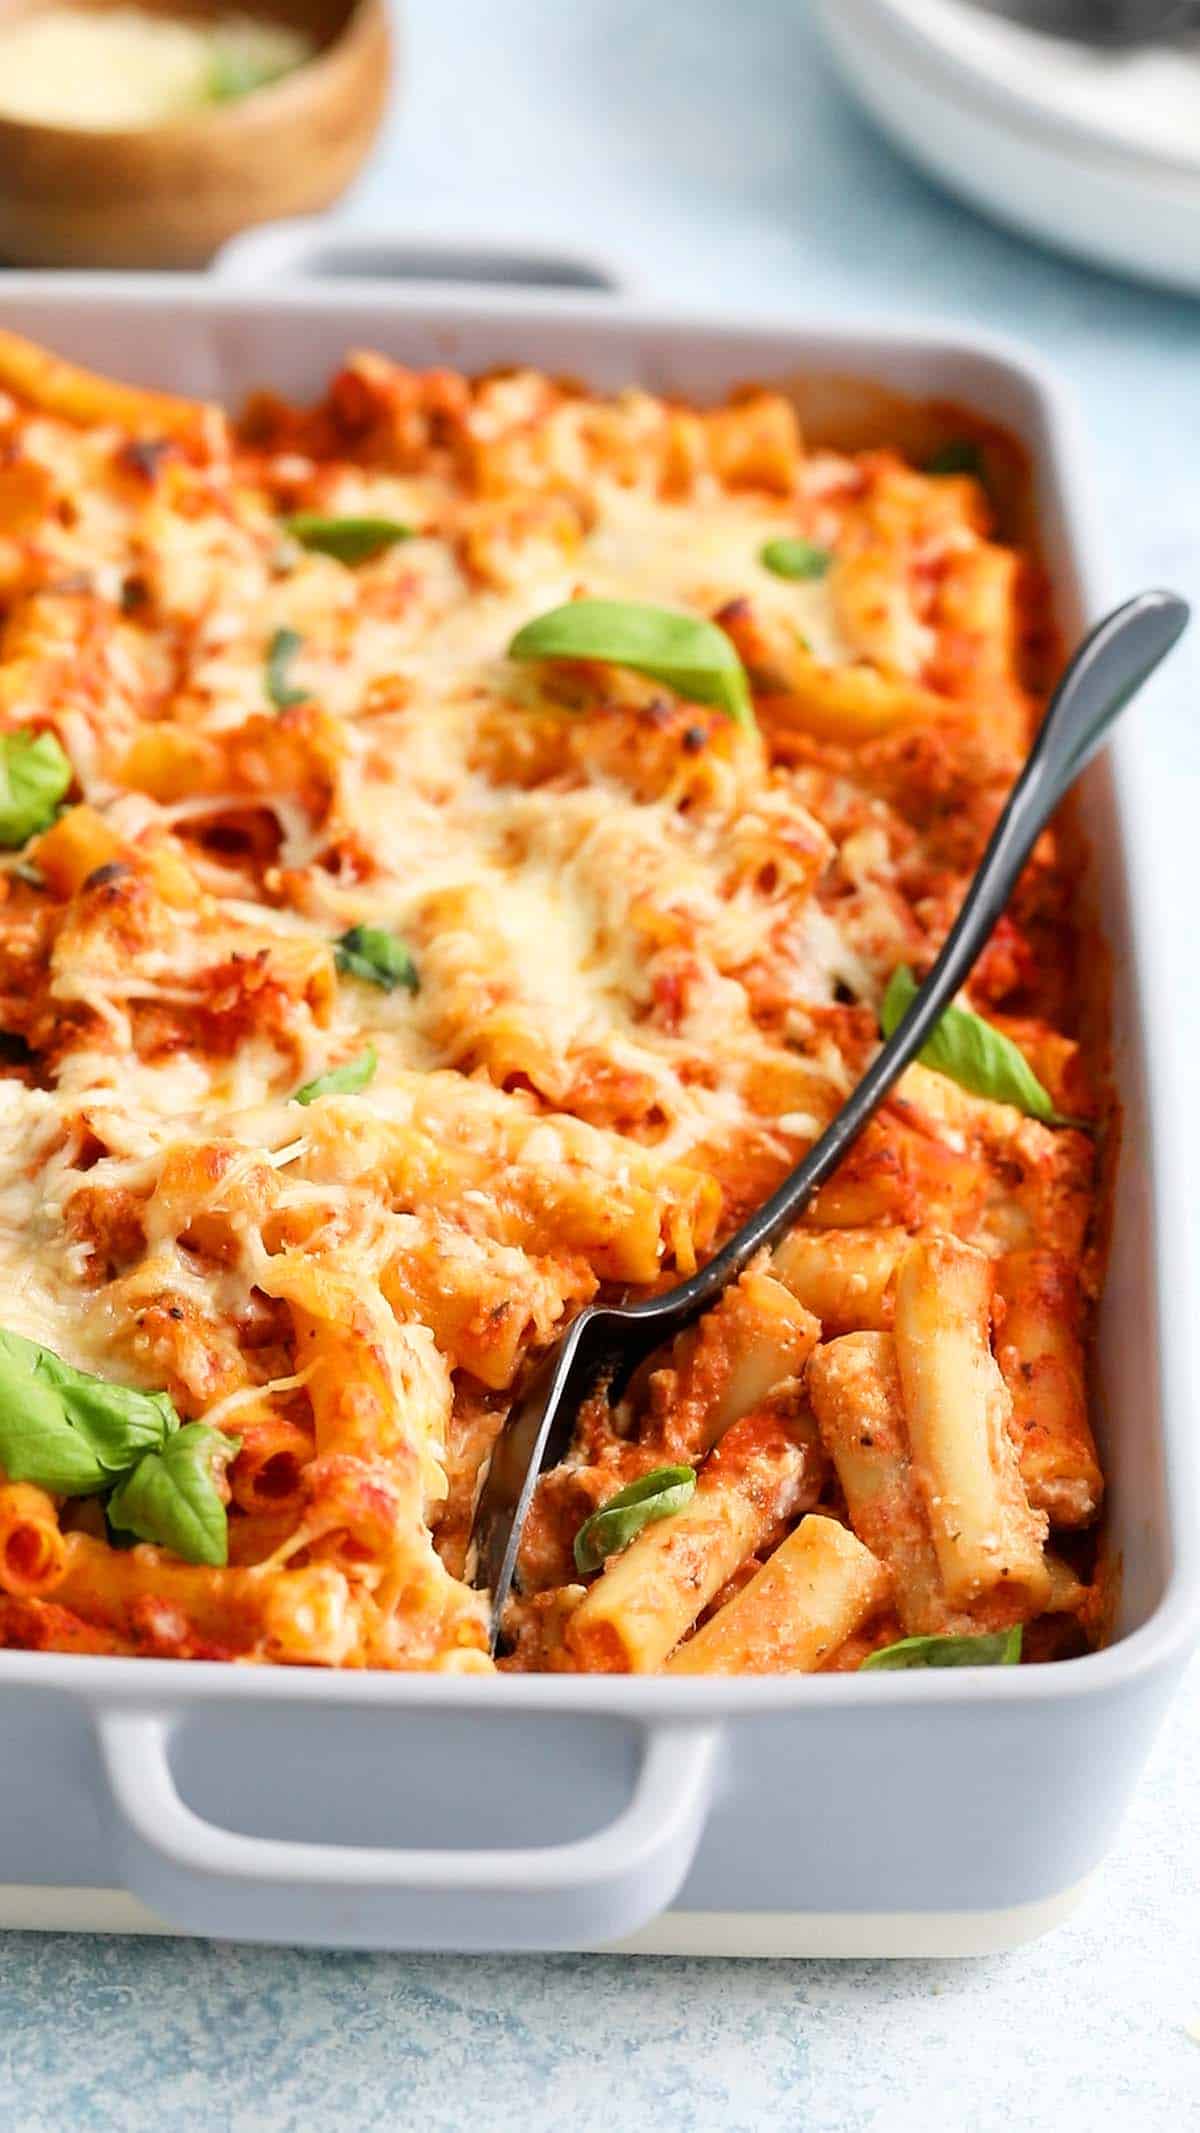 baked ziti pasta in a grey casserole dish along with a black spoon.